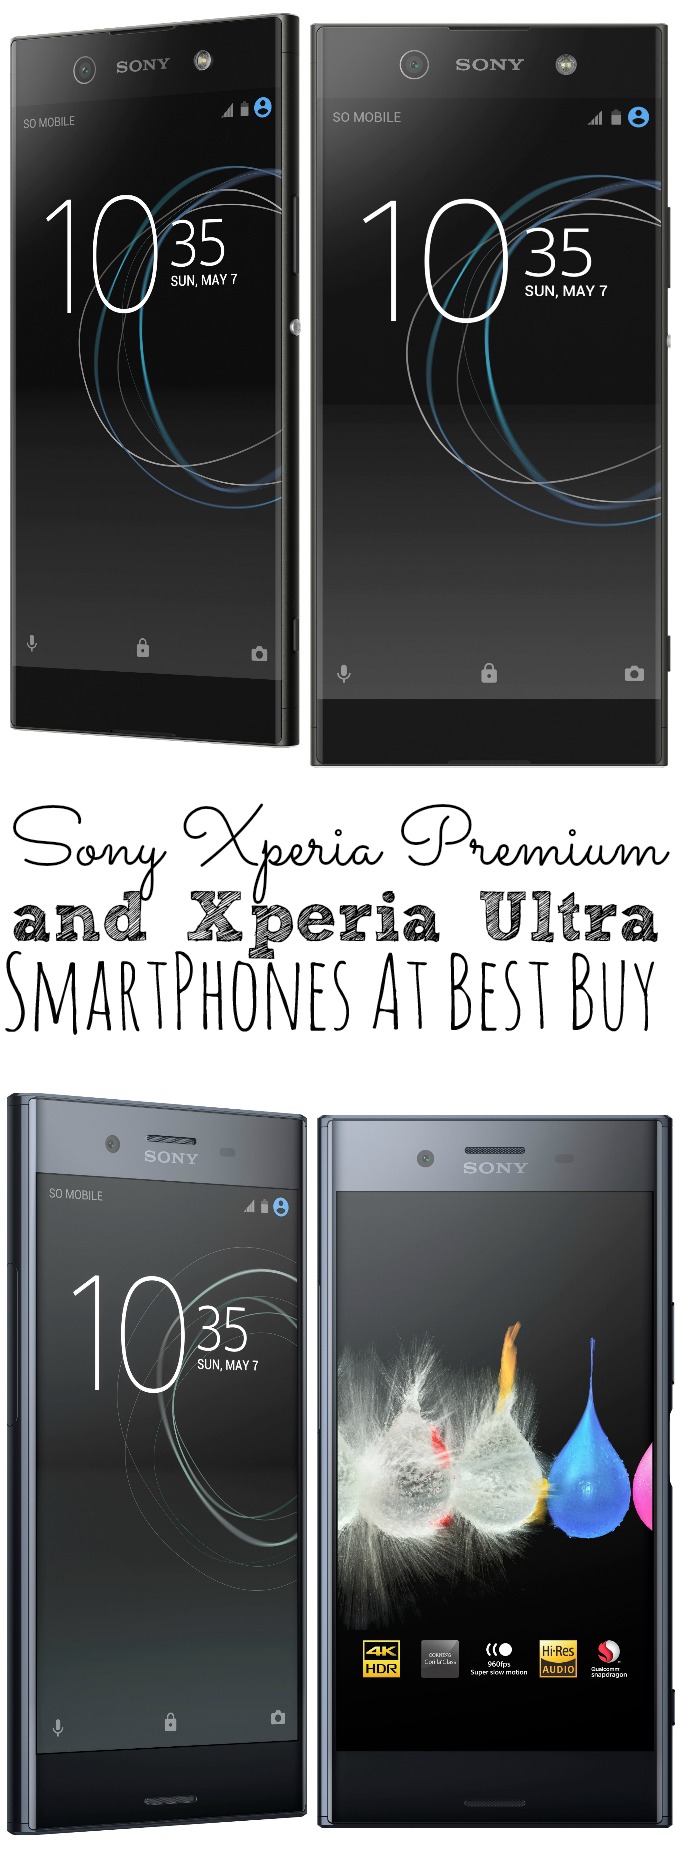 Sony Xperia Premium and Xperia Ultra Smartphones At Best Buy - simplytodaylife.com